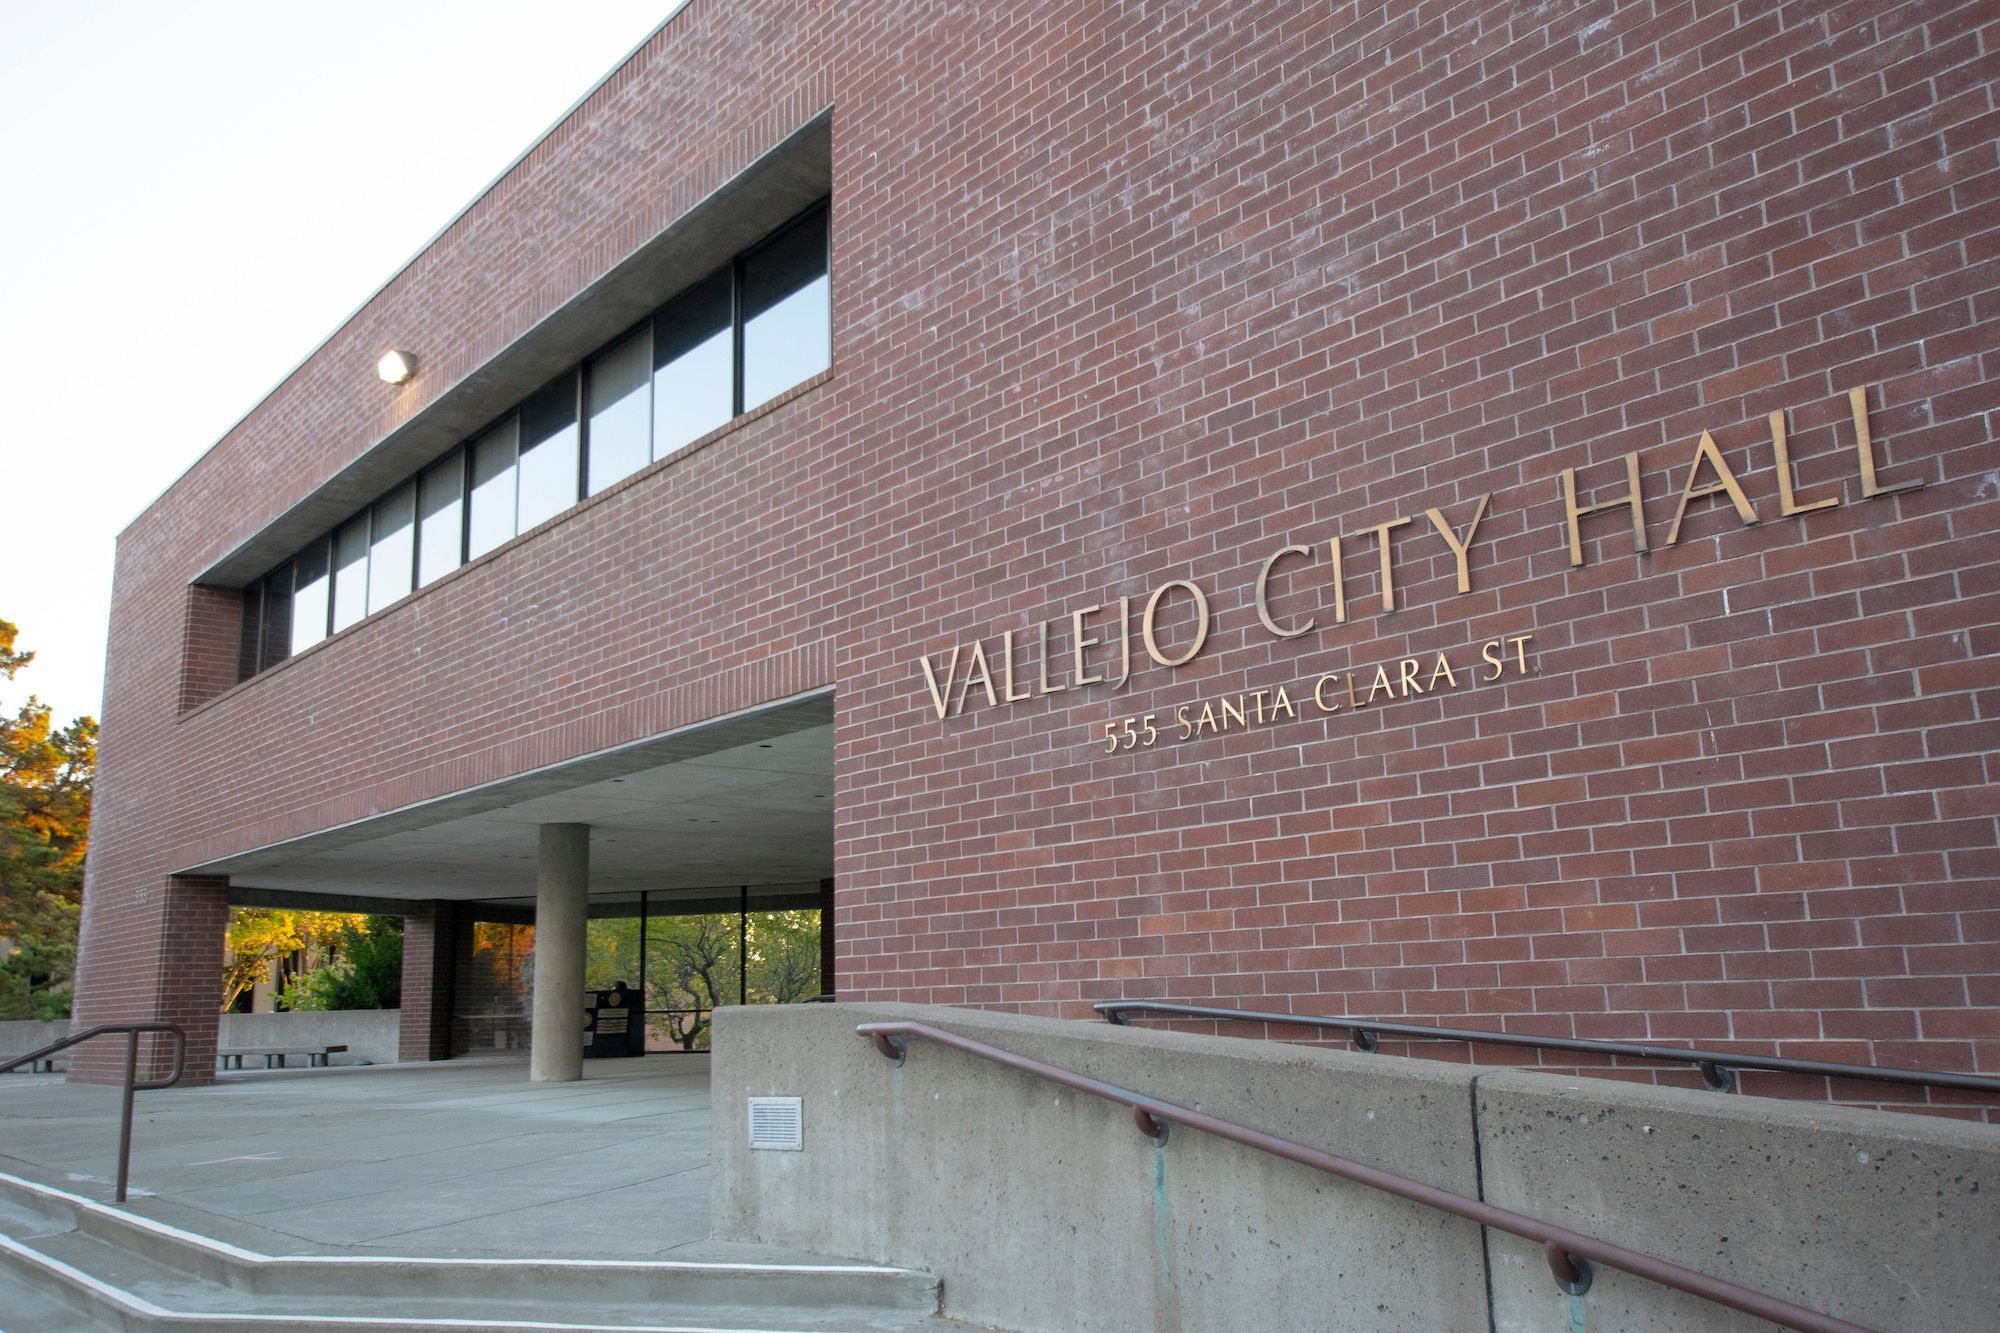 About South Vallejo  Schools, Demographics, Things to Do 